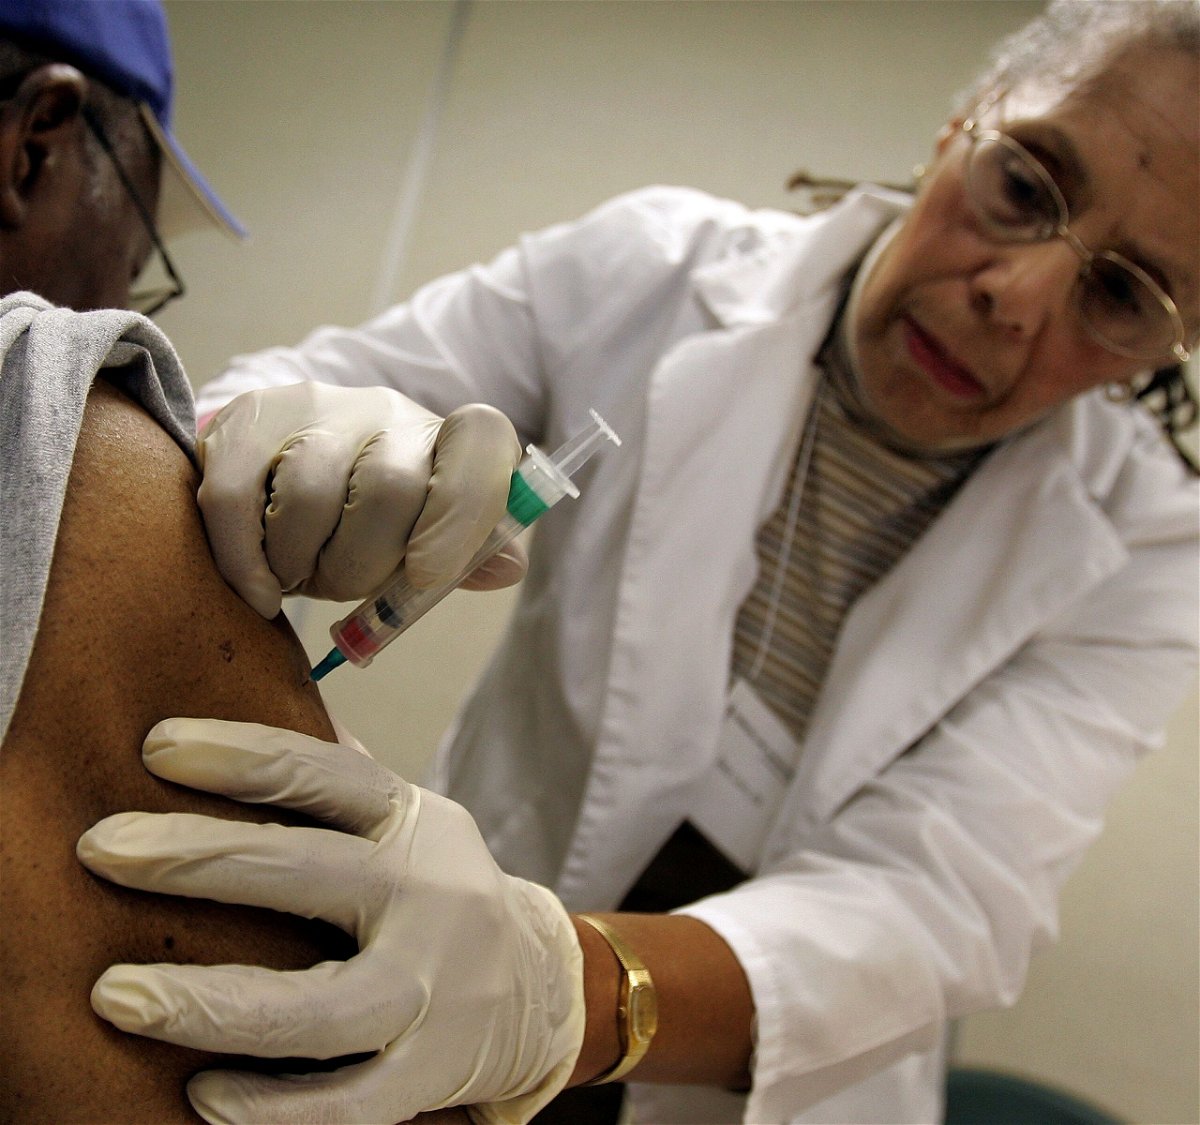 <i>Tim Boyle/Getty Images North America/Getty Images</i><br/>Flu season has ramped up early in the United States and flu hospitalizations are worse than usual for this time of year. Robert Garner (left) receives a flu shot from registered nurse Betty Lewis in 2006 in Chicago.